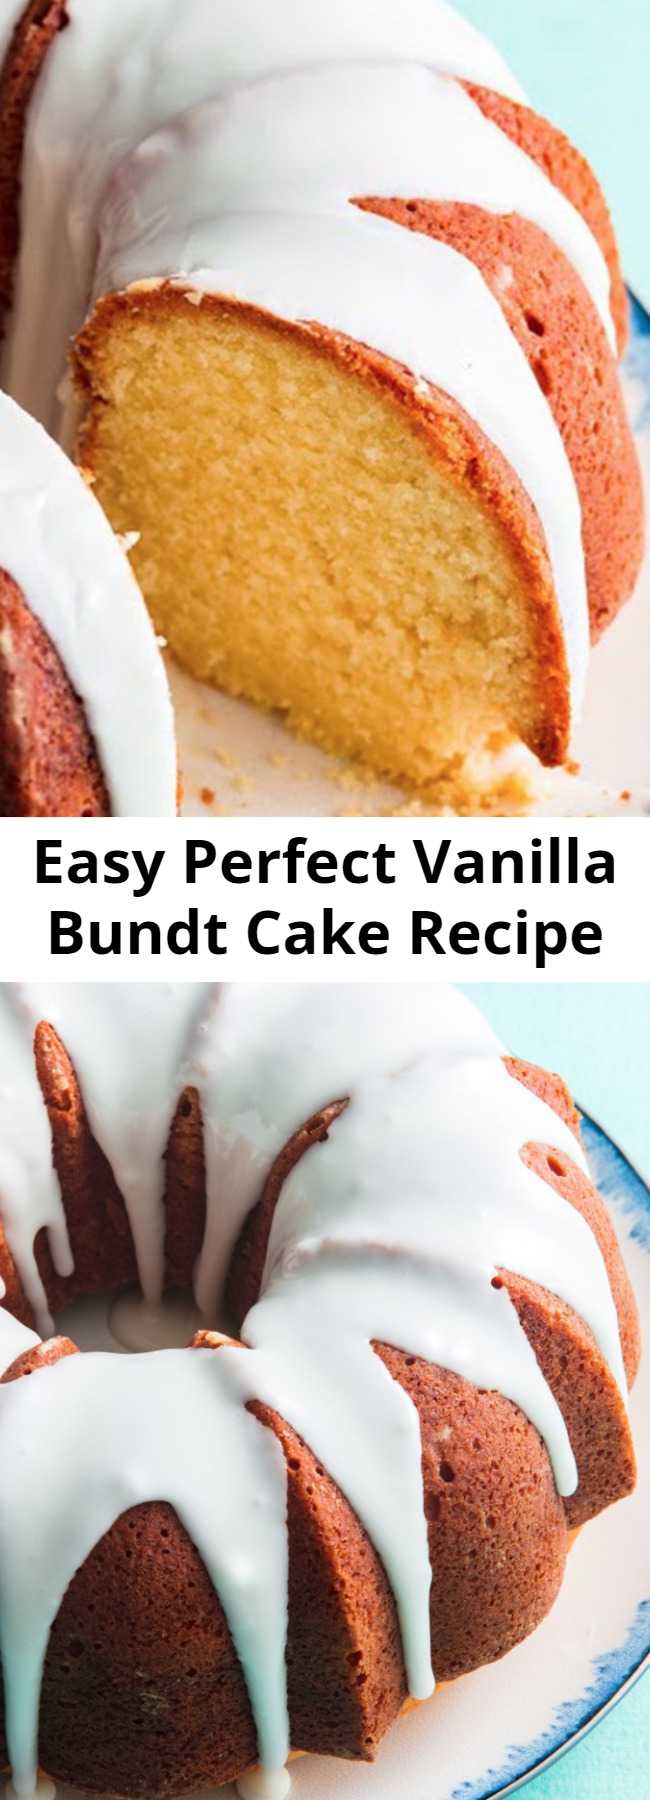 Easy Perfect Vanilla Bundt Cake Recipe - We tested this cake over and over again until it was absolutely perfect. Even the most amateur baker can nail it at home.